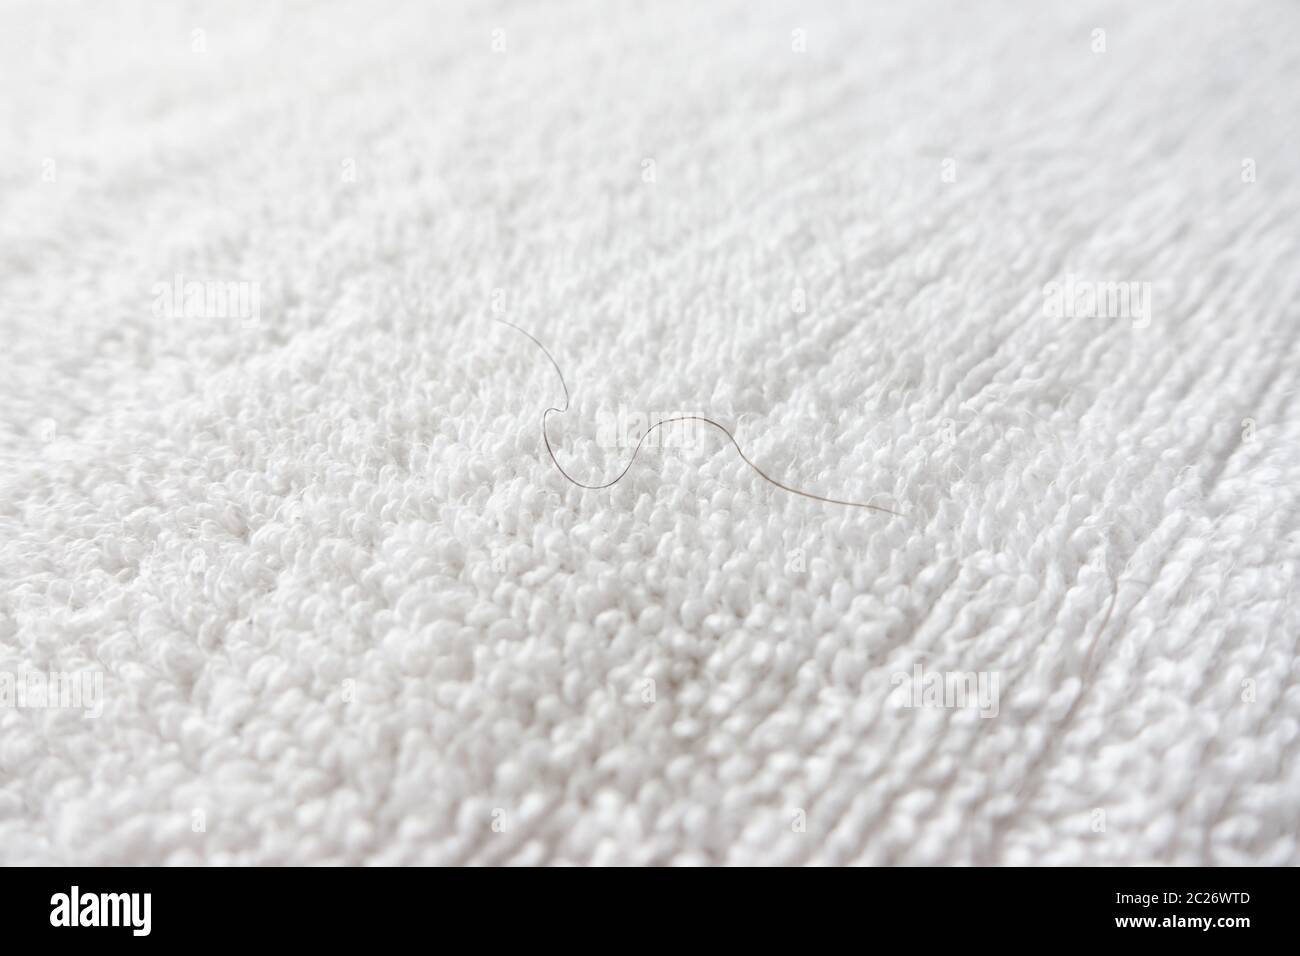 pubic hair fall on white towel Stock Photo - Alamy